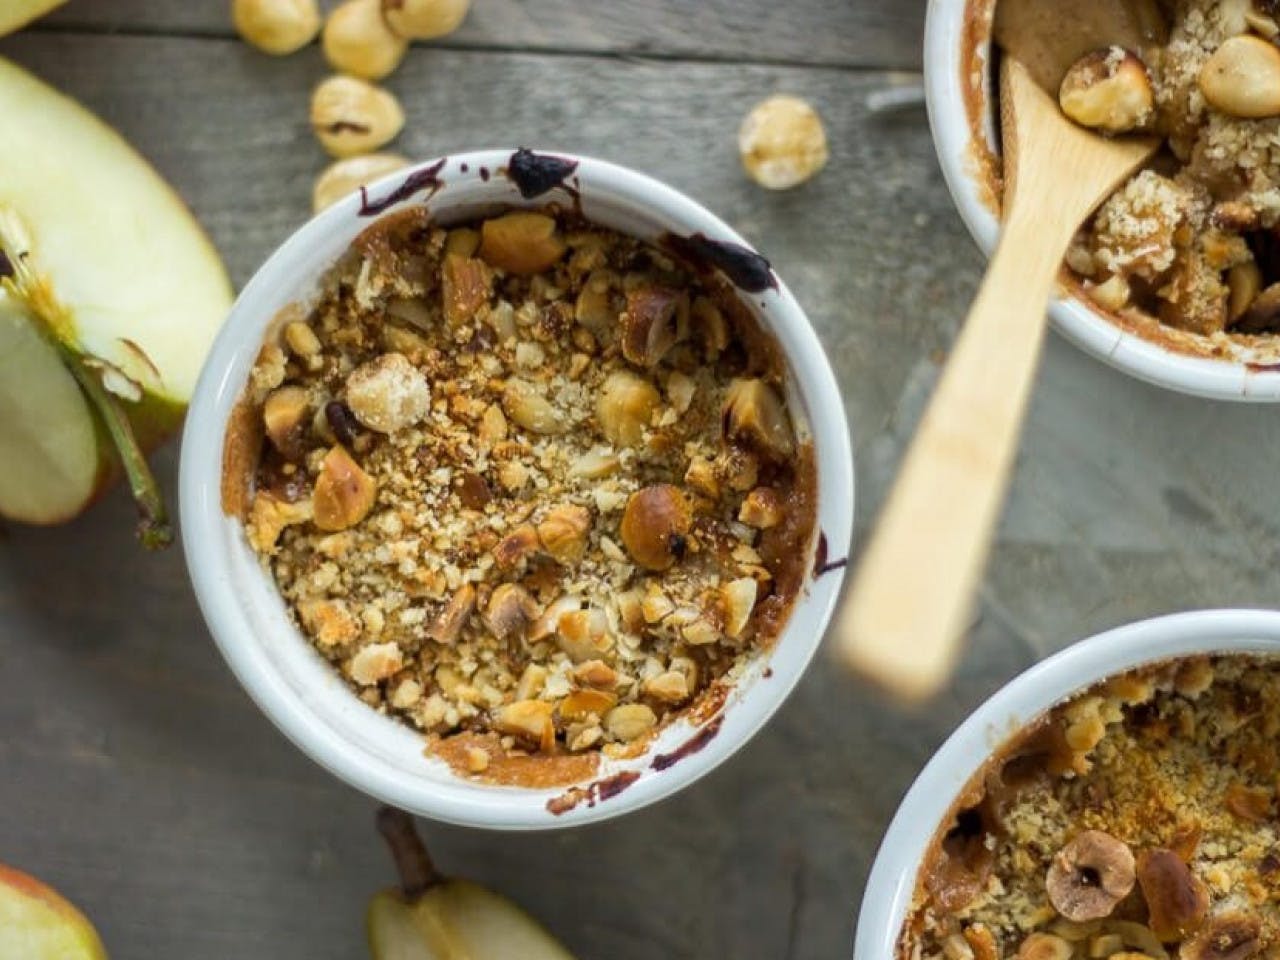 Paleo apple and pear crumble